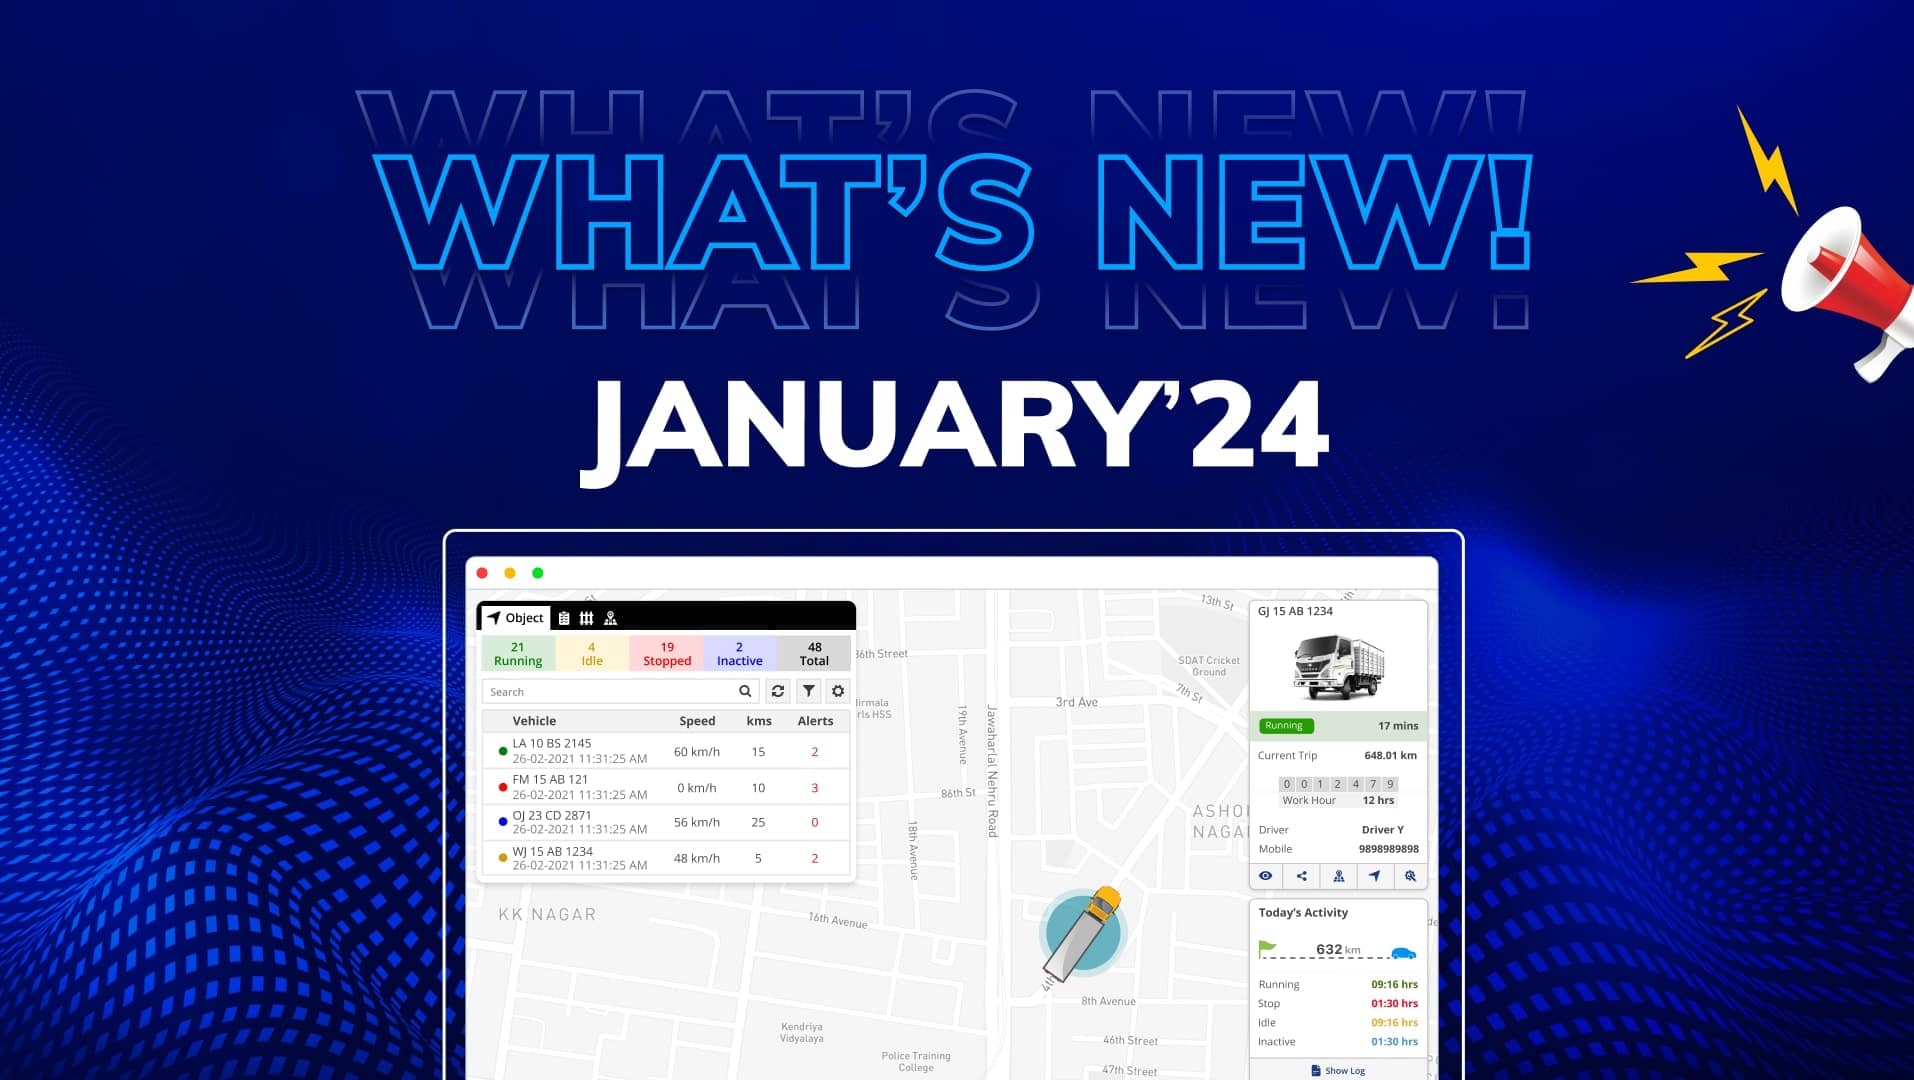 What’s New for the month of January 2024 